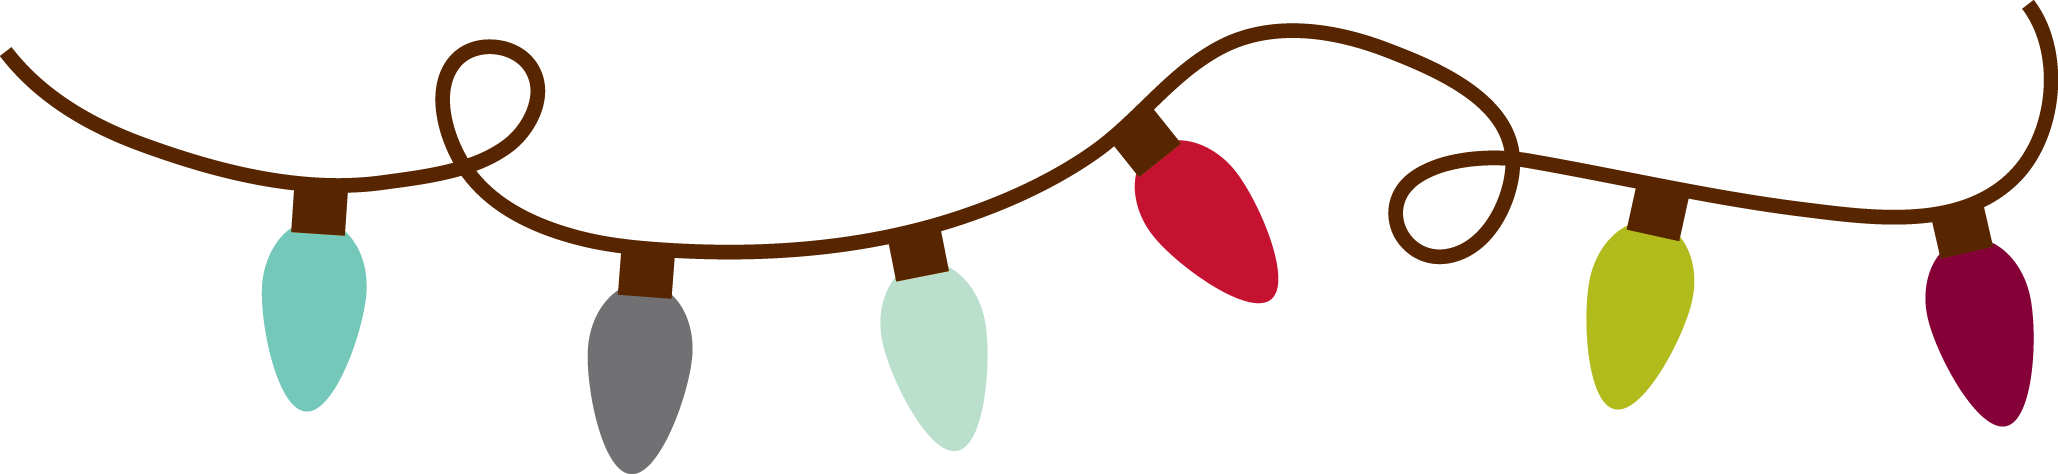 Light Garland PNG Image High Quality PNG Image